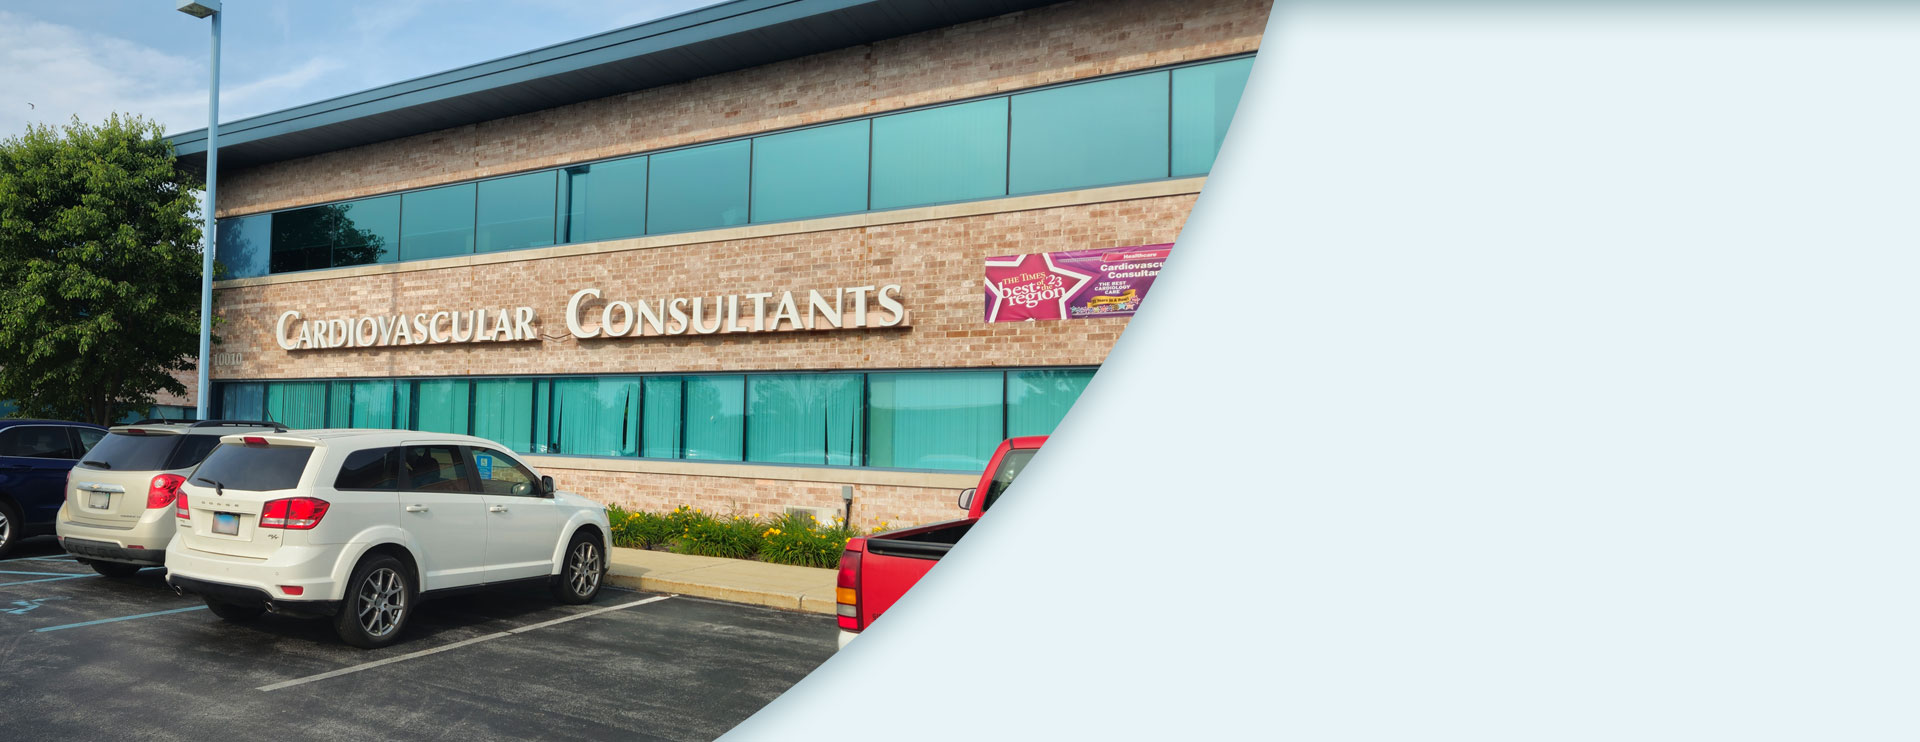 Northwest Indiana Offices for Cardiovascular Consultants | Cardiology in Munster & Hammond, IN